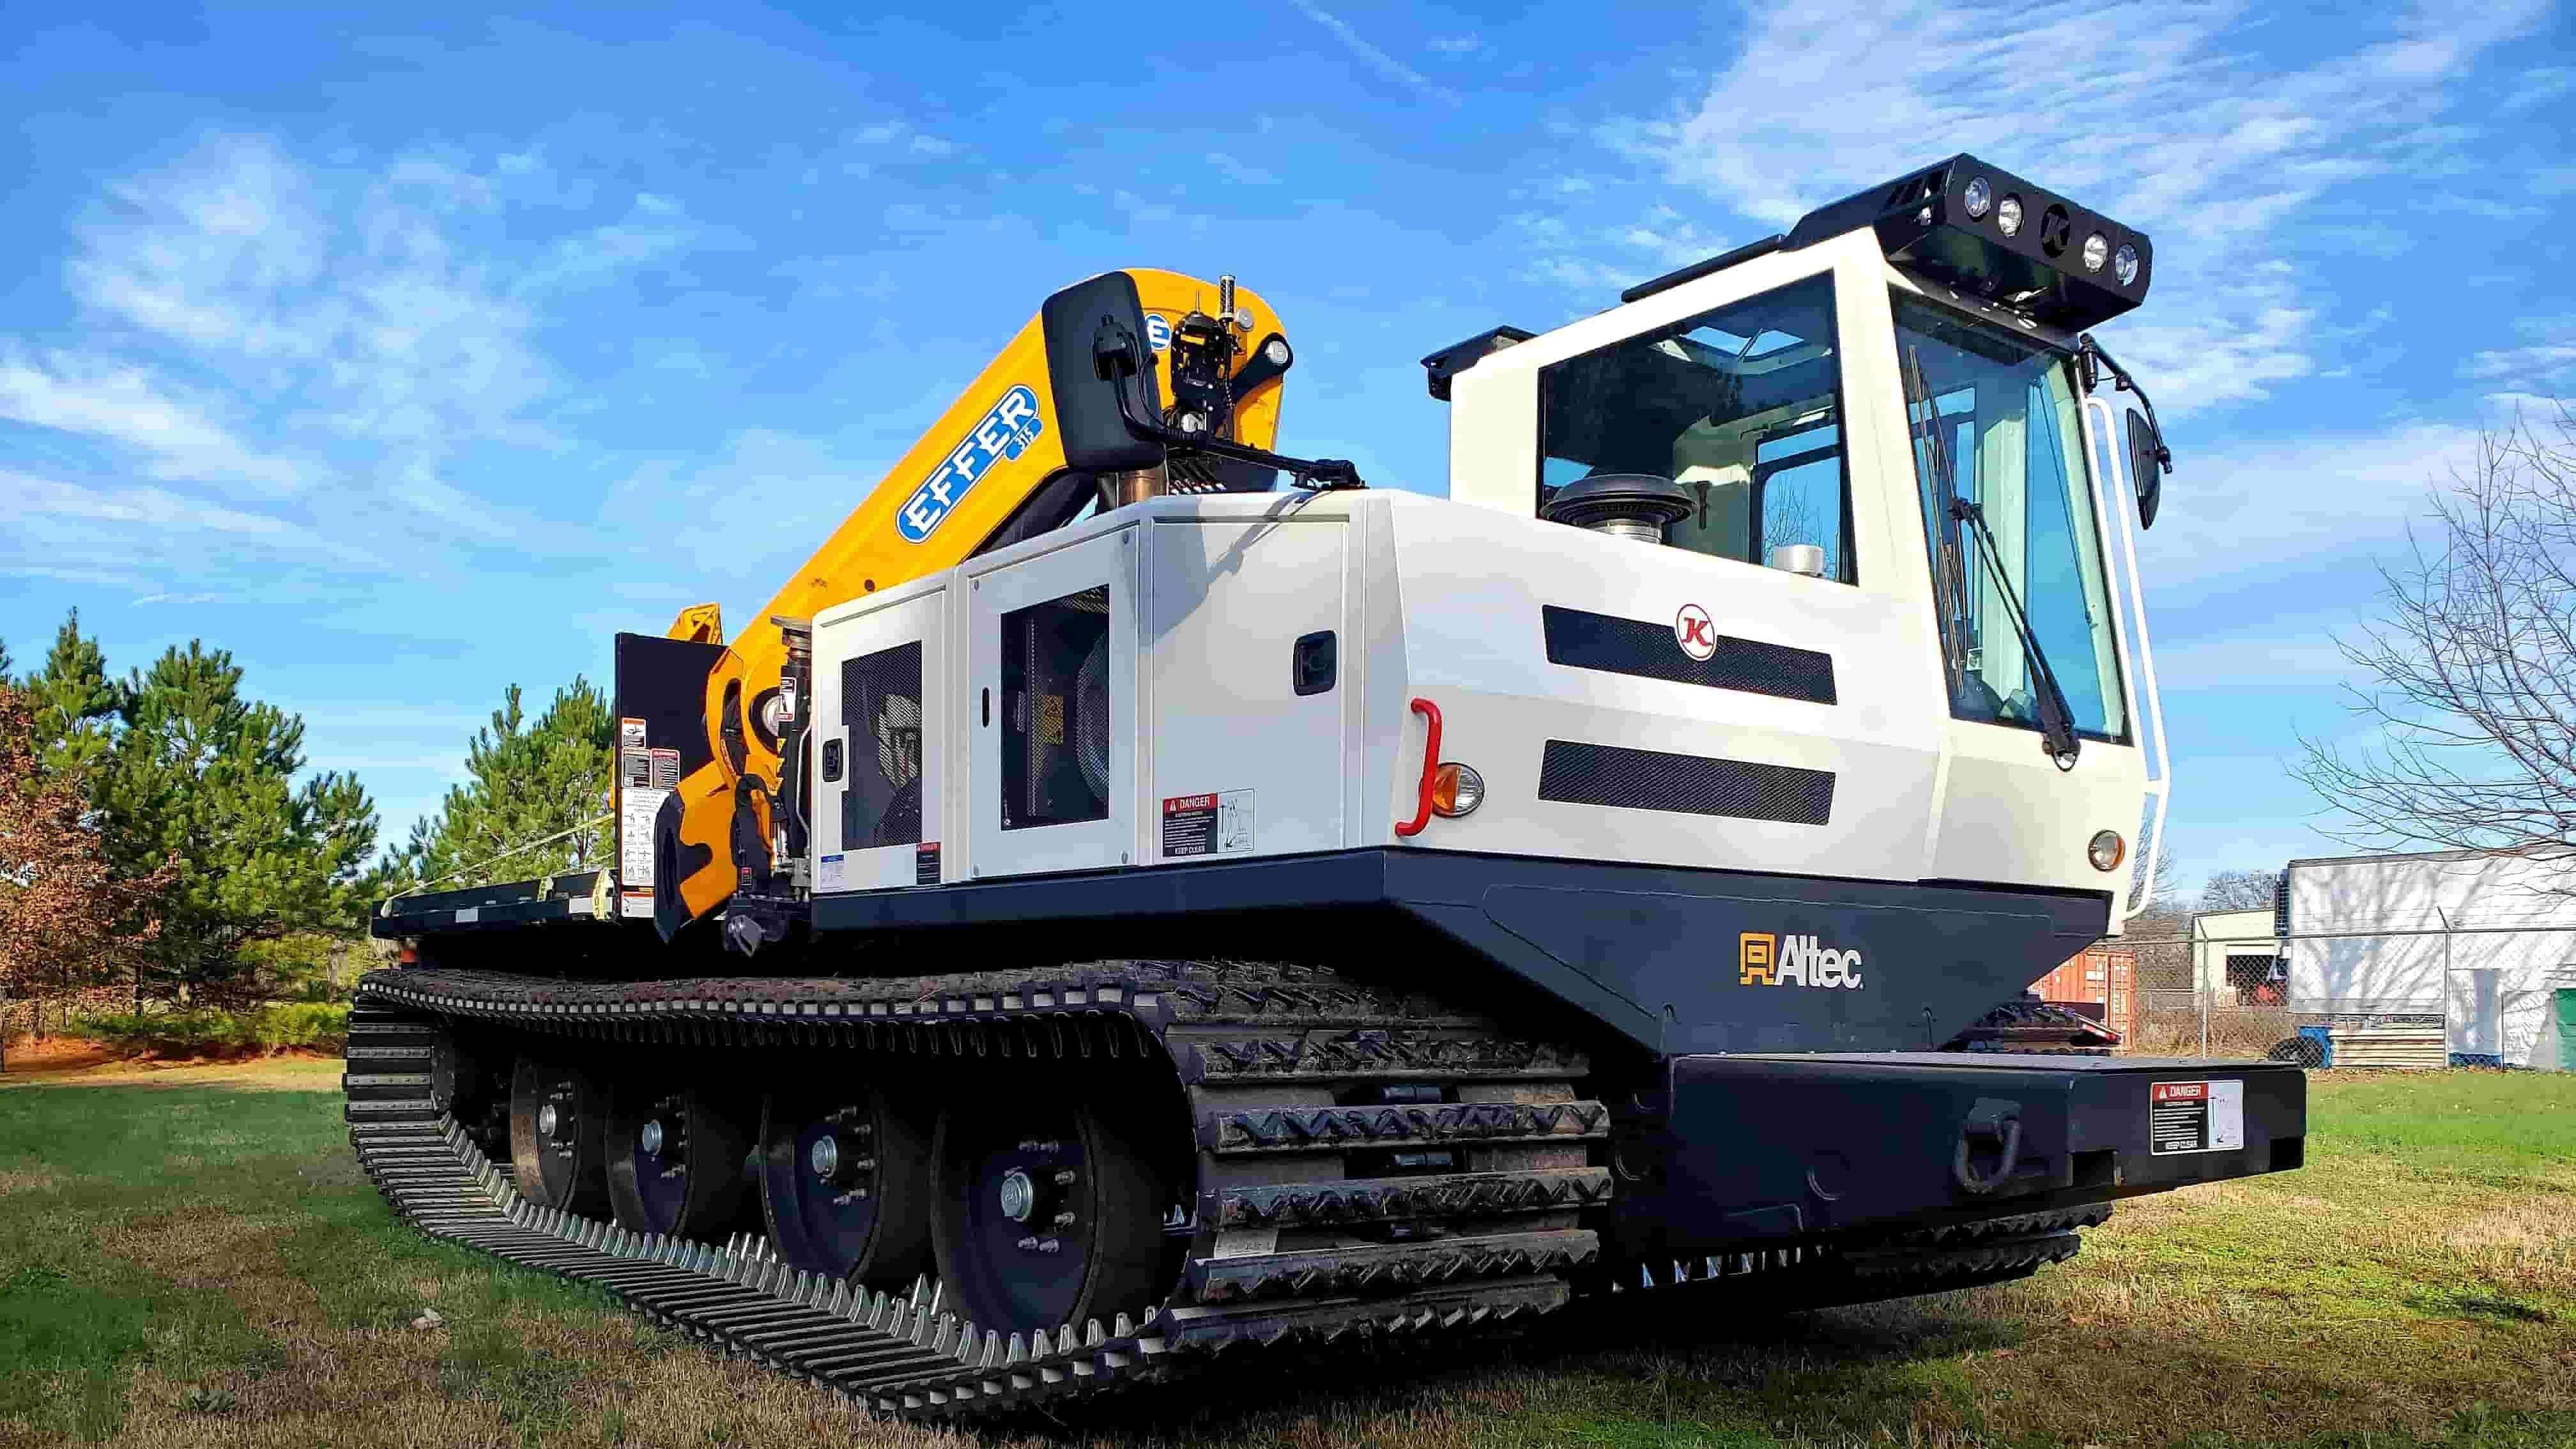 PowerBully track carrier with Effer crane